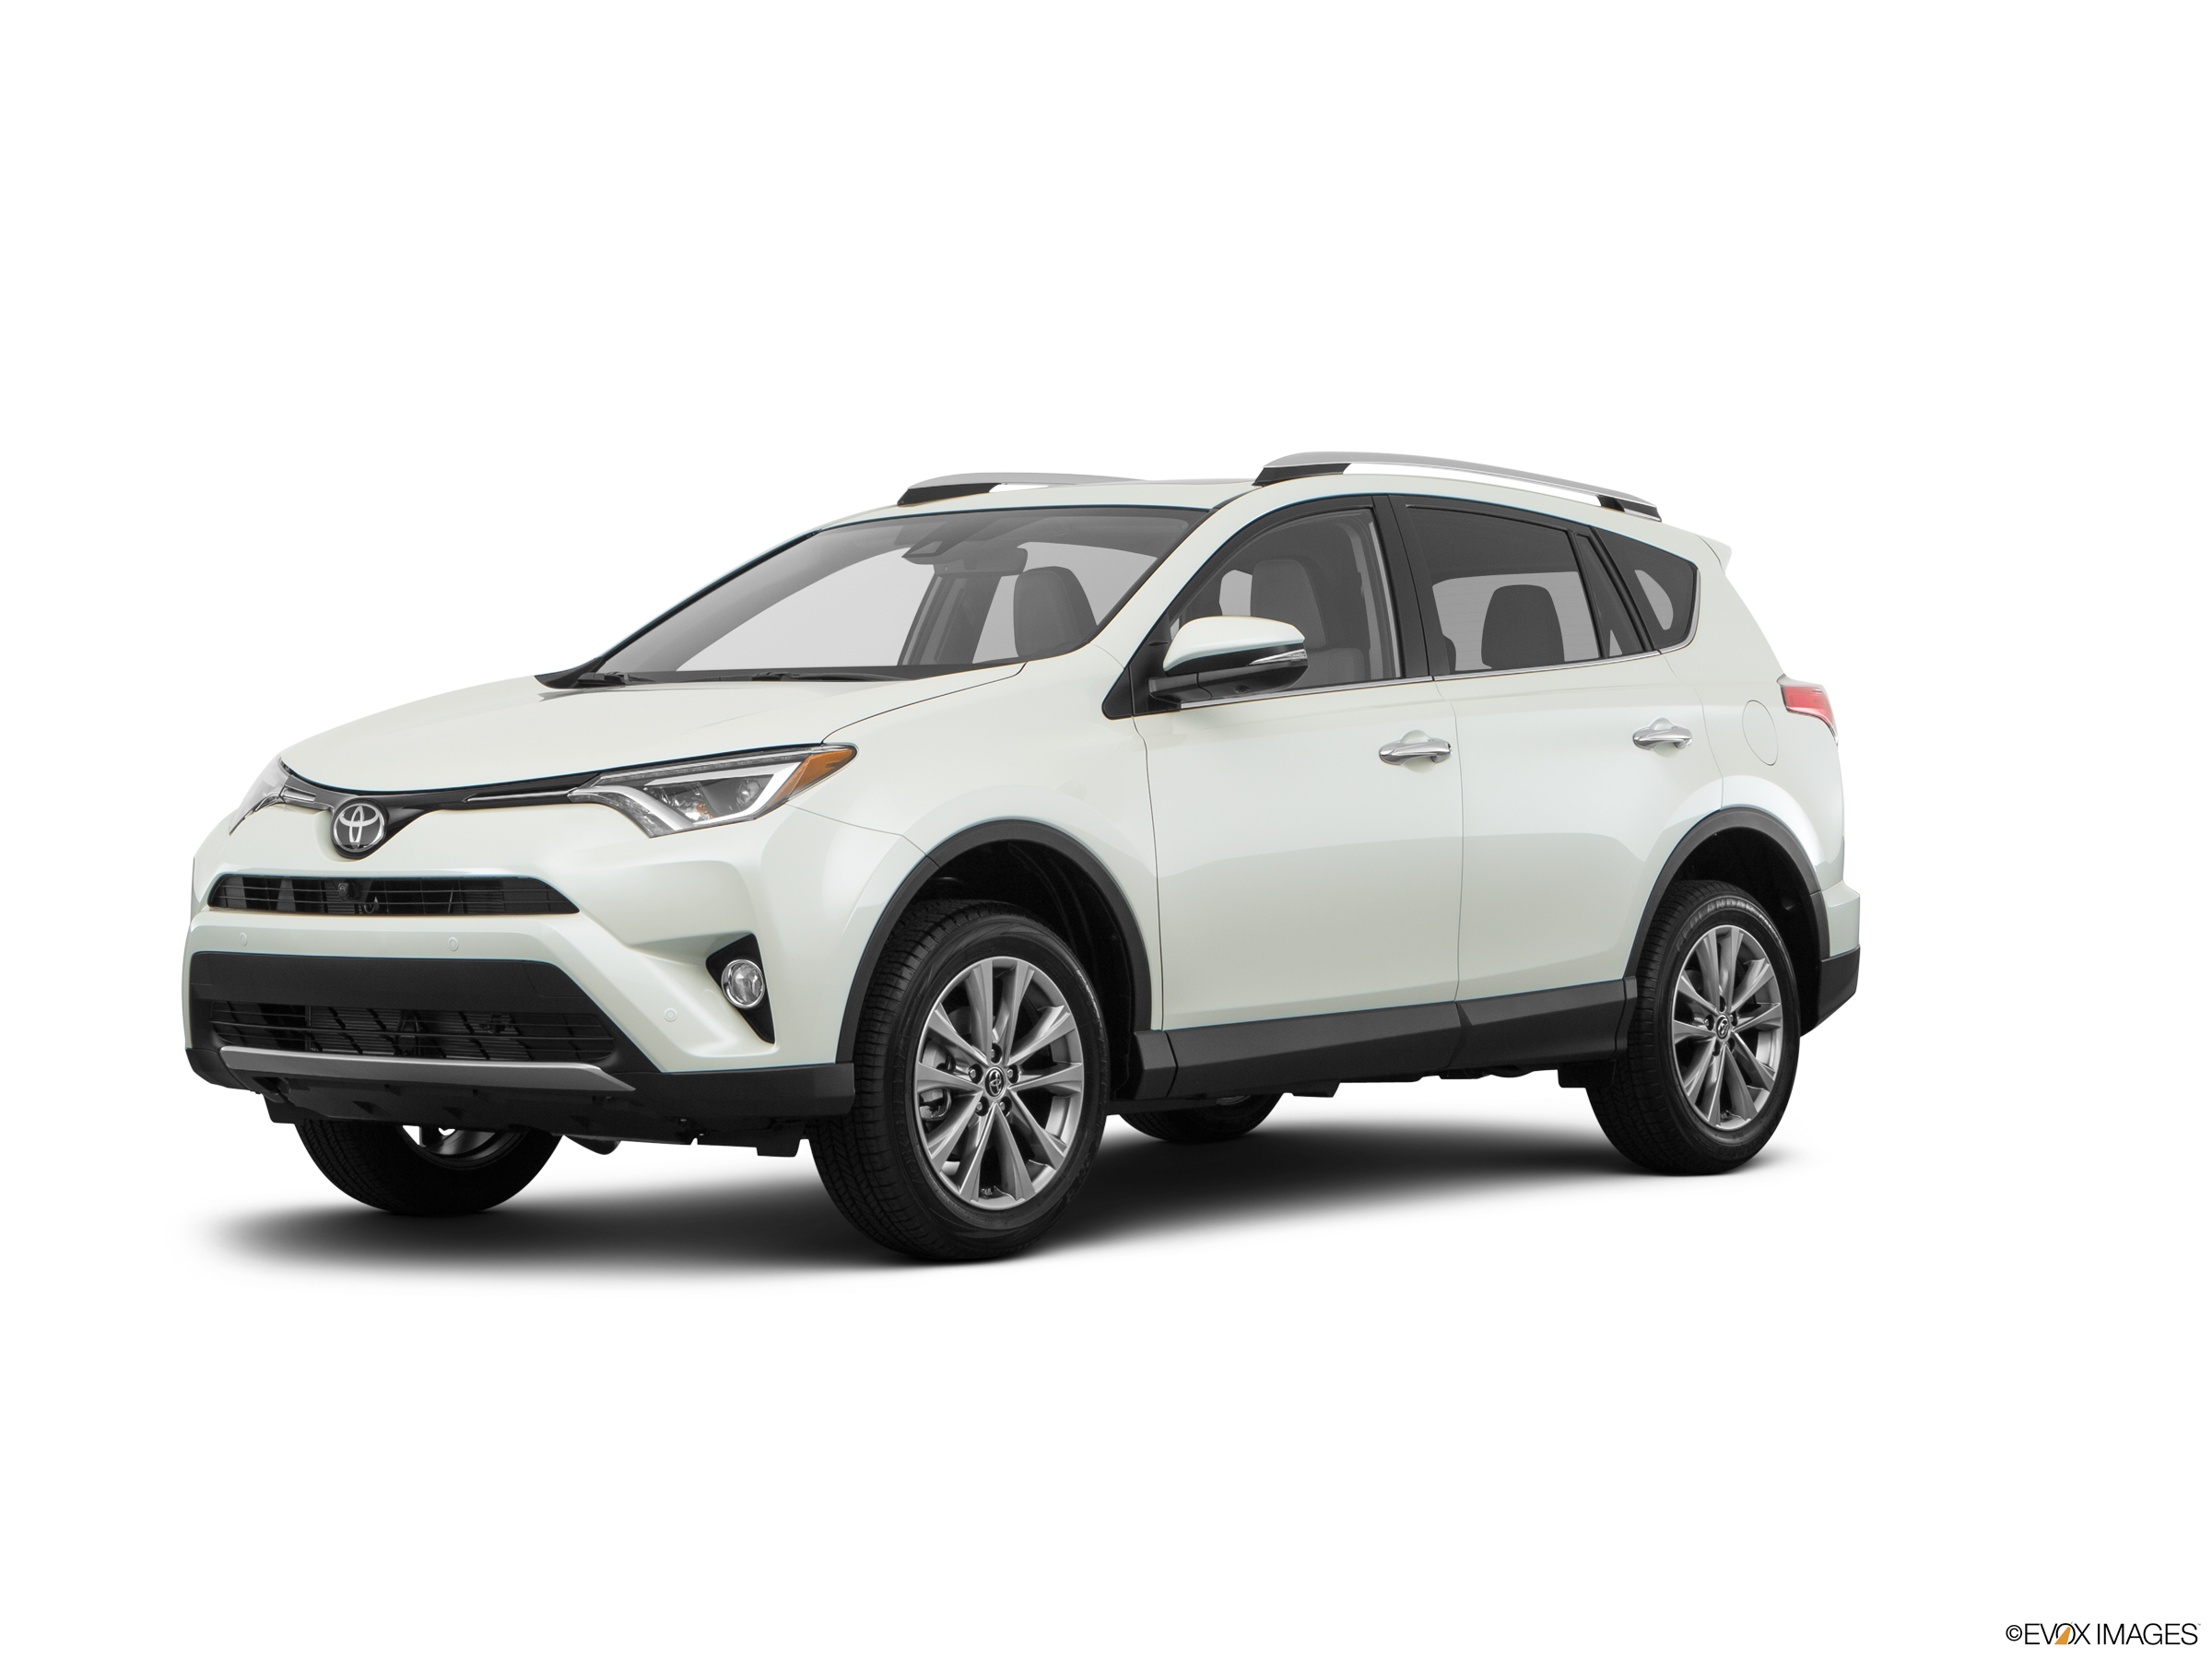 Discover 89+ about 2016 toyota rav4 limited super hot in.daotaonec